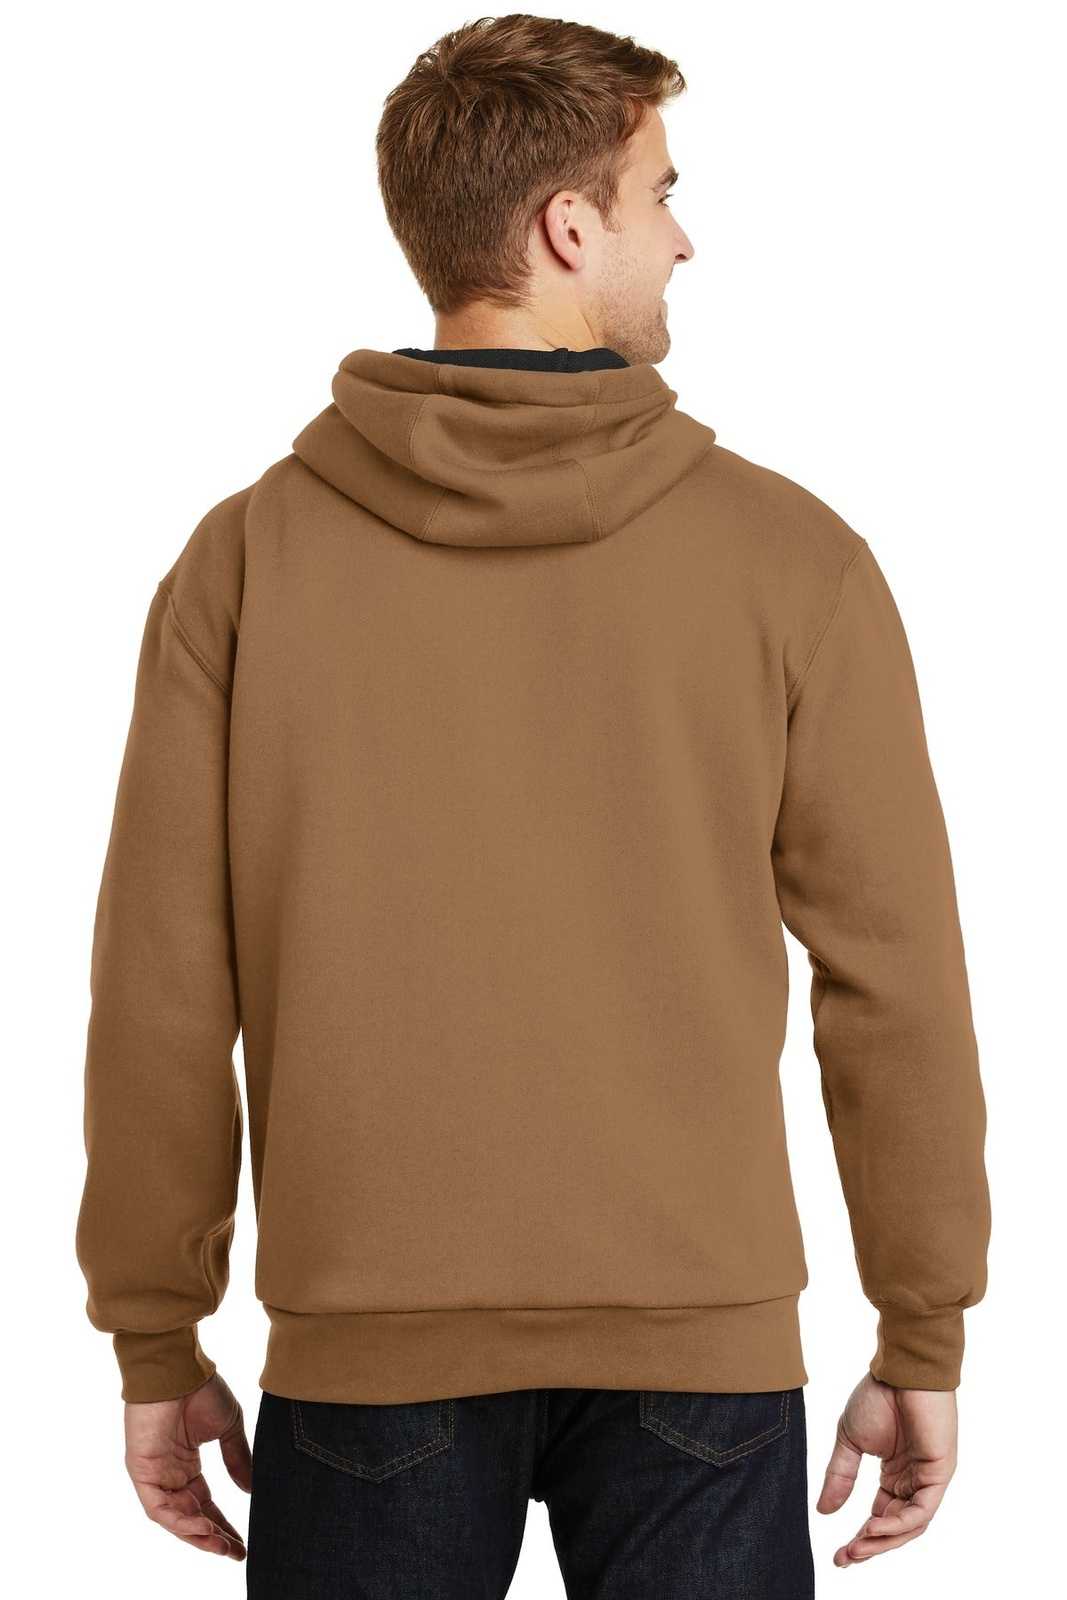 CornerStone CS620 Heavyweight Full-Zip Hooded Sweatshirt with Thermal Lining - Duck Brown - HIT a Double - 1